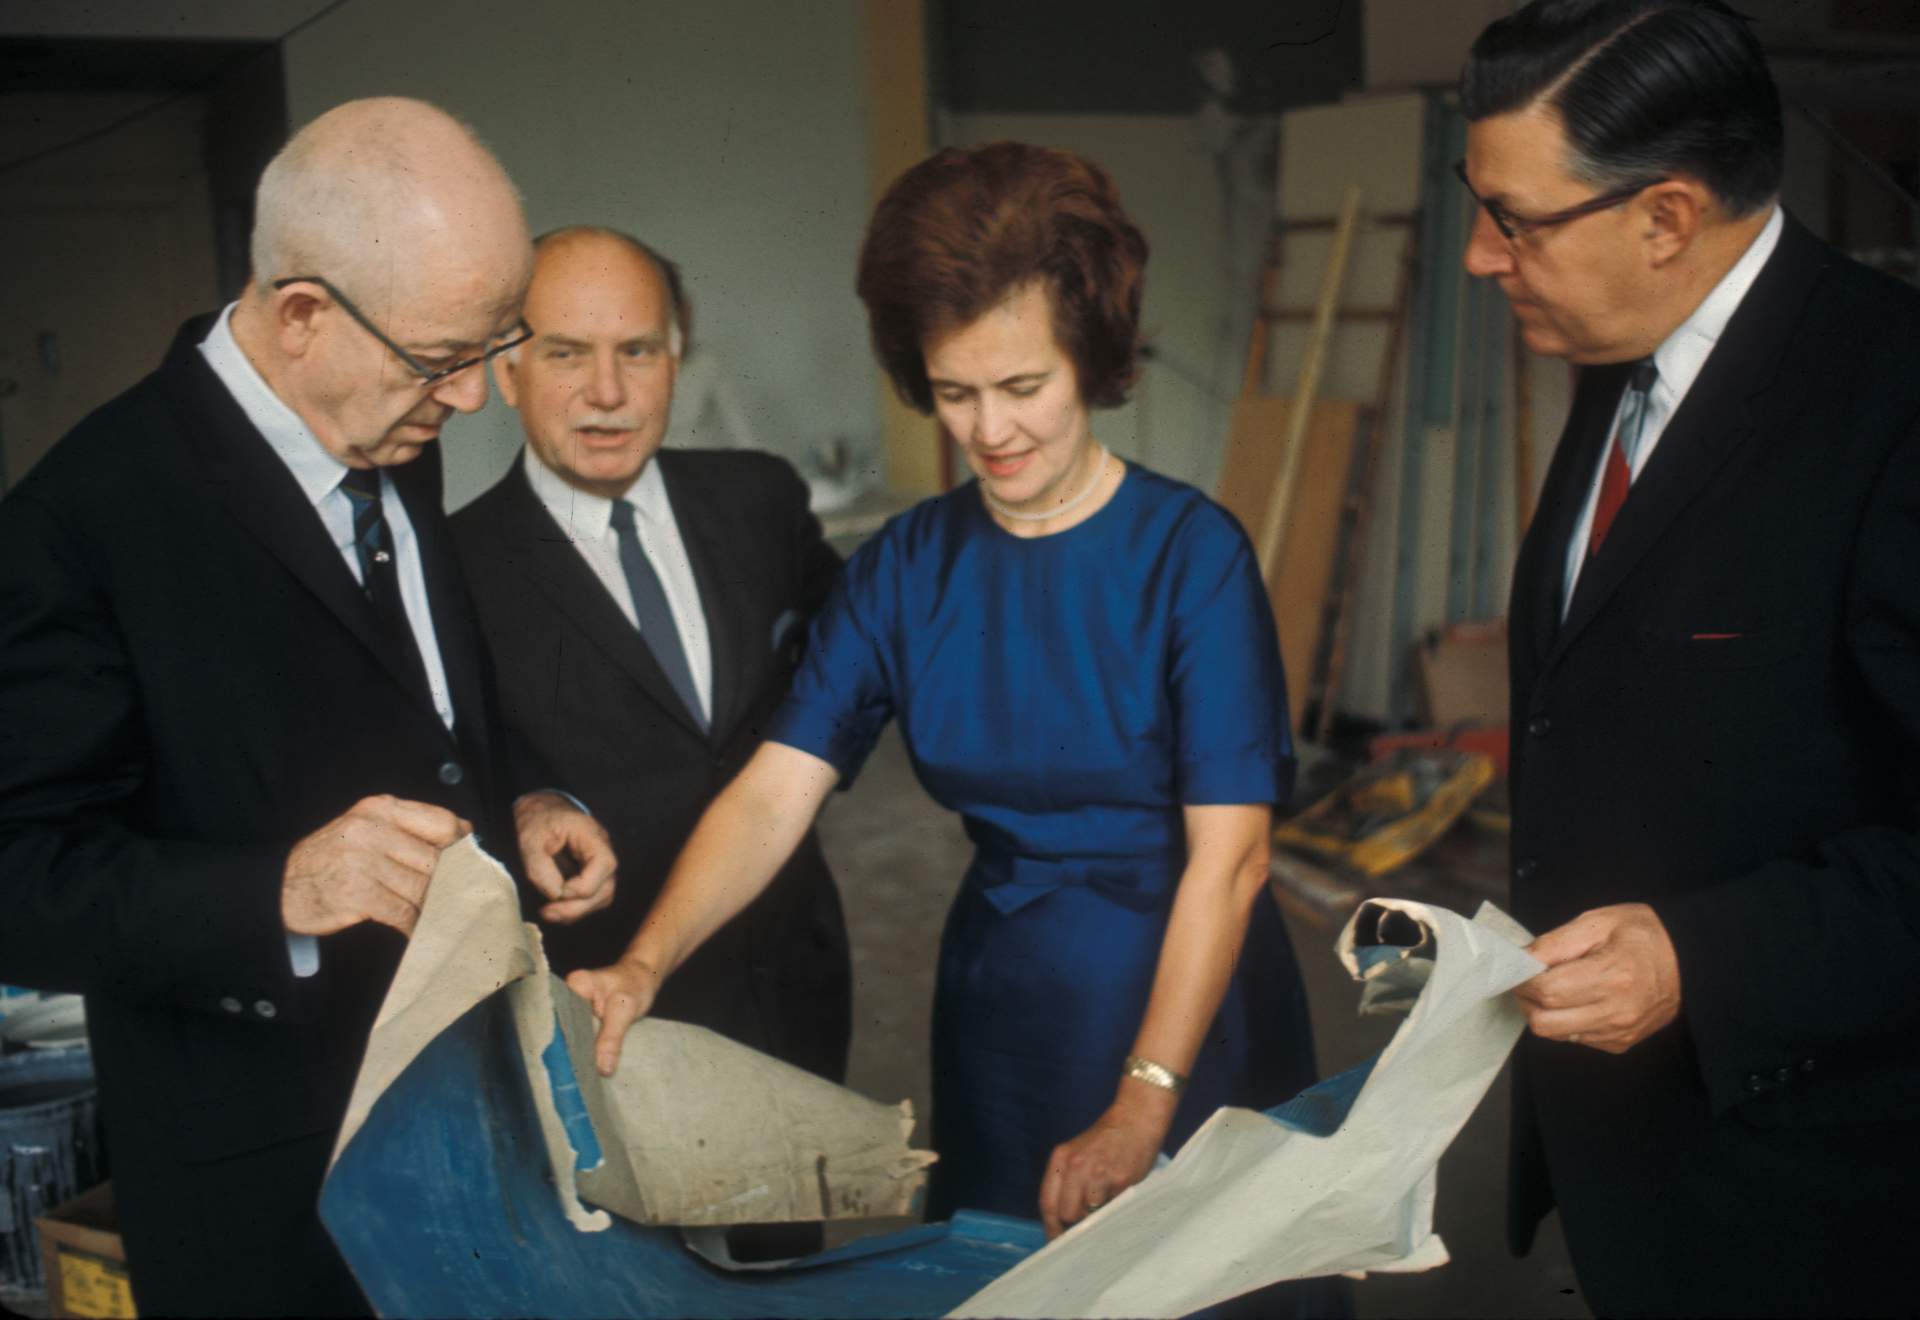 Paul Bulger, Dr. Edna Lindemann, Dr. Kenneth Winebrenner, and Charles E. Burchfield looking at blueprints for the Burchfield Art Center